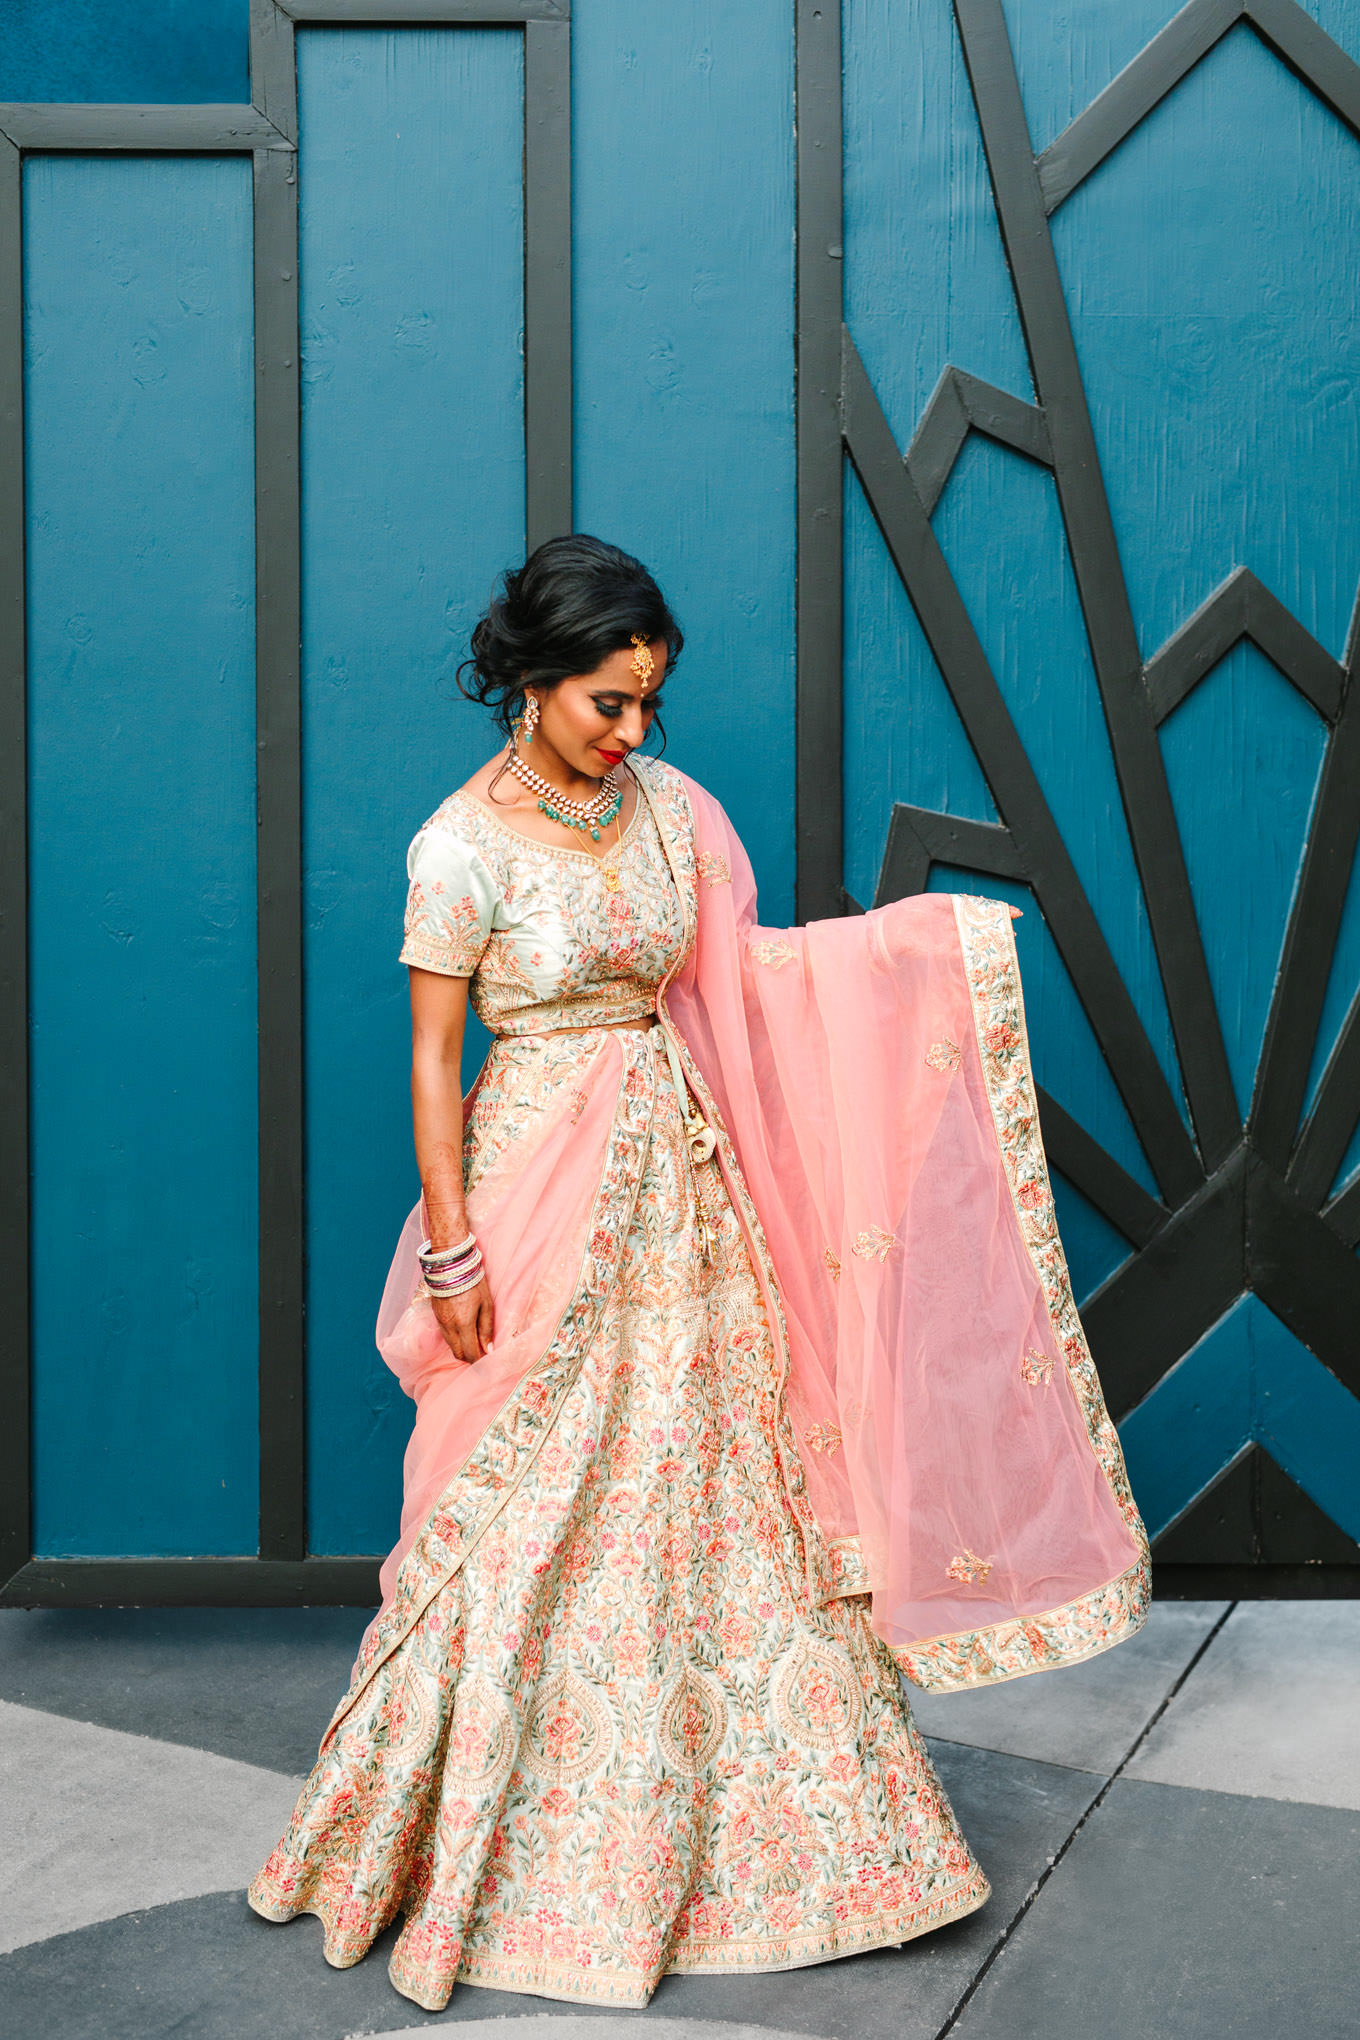 Bride in embroidered pink and cream gown outside of venue. Two Disney artists create a unique and colorful Indian Fusion wedding at The Fig House Los Angeles, featured on Green Wedding Shoes. | Colorful and elevated wedding inspiration for fun-loving couples in Southern California | #indianwedding #indianfusionwedding #thefighouse #losangeleswedding   Source: Mary Costa Photography | Los Angeles